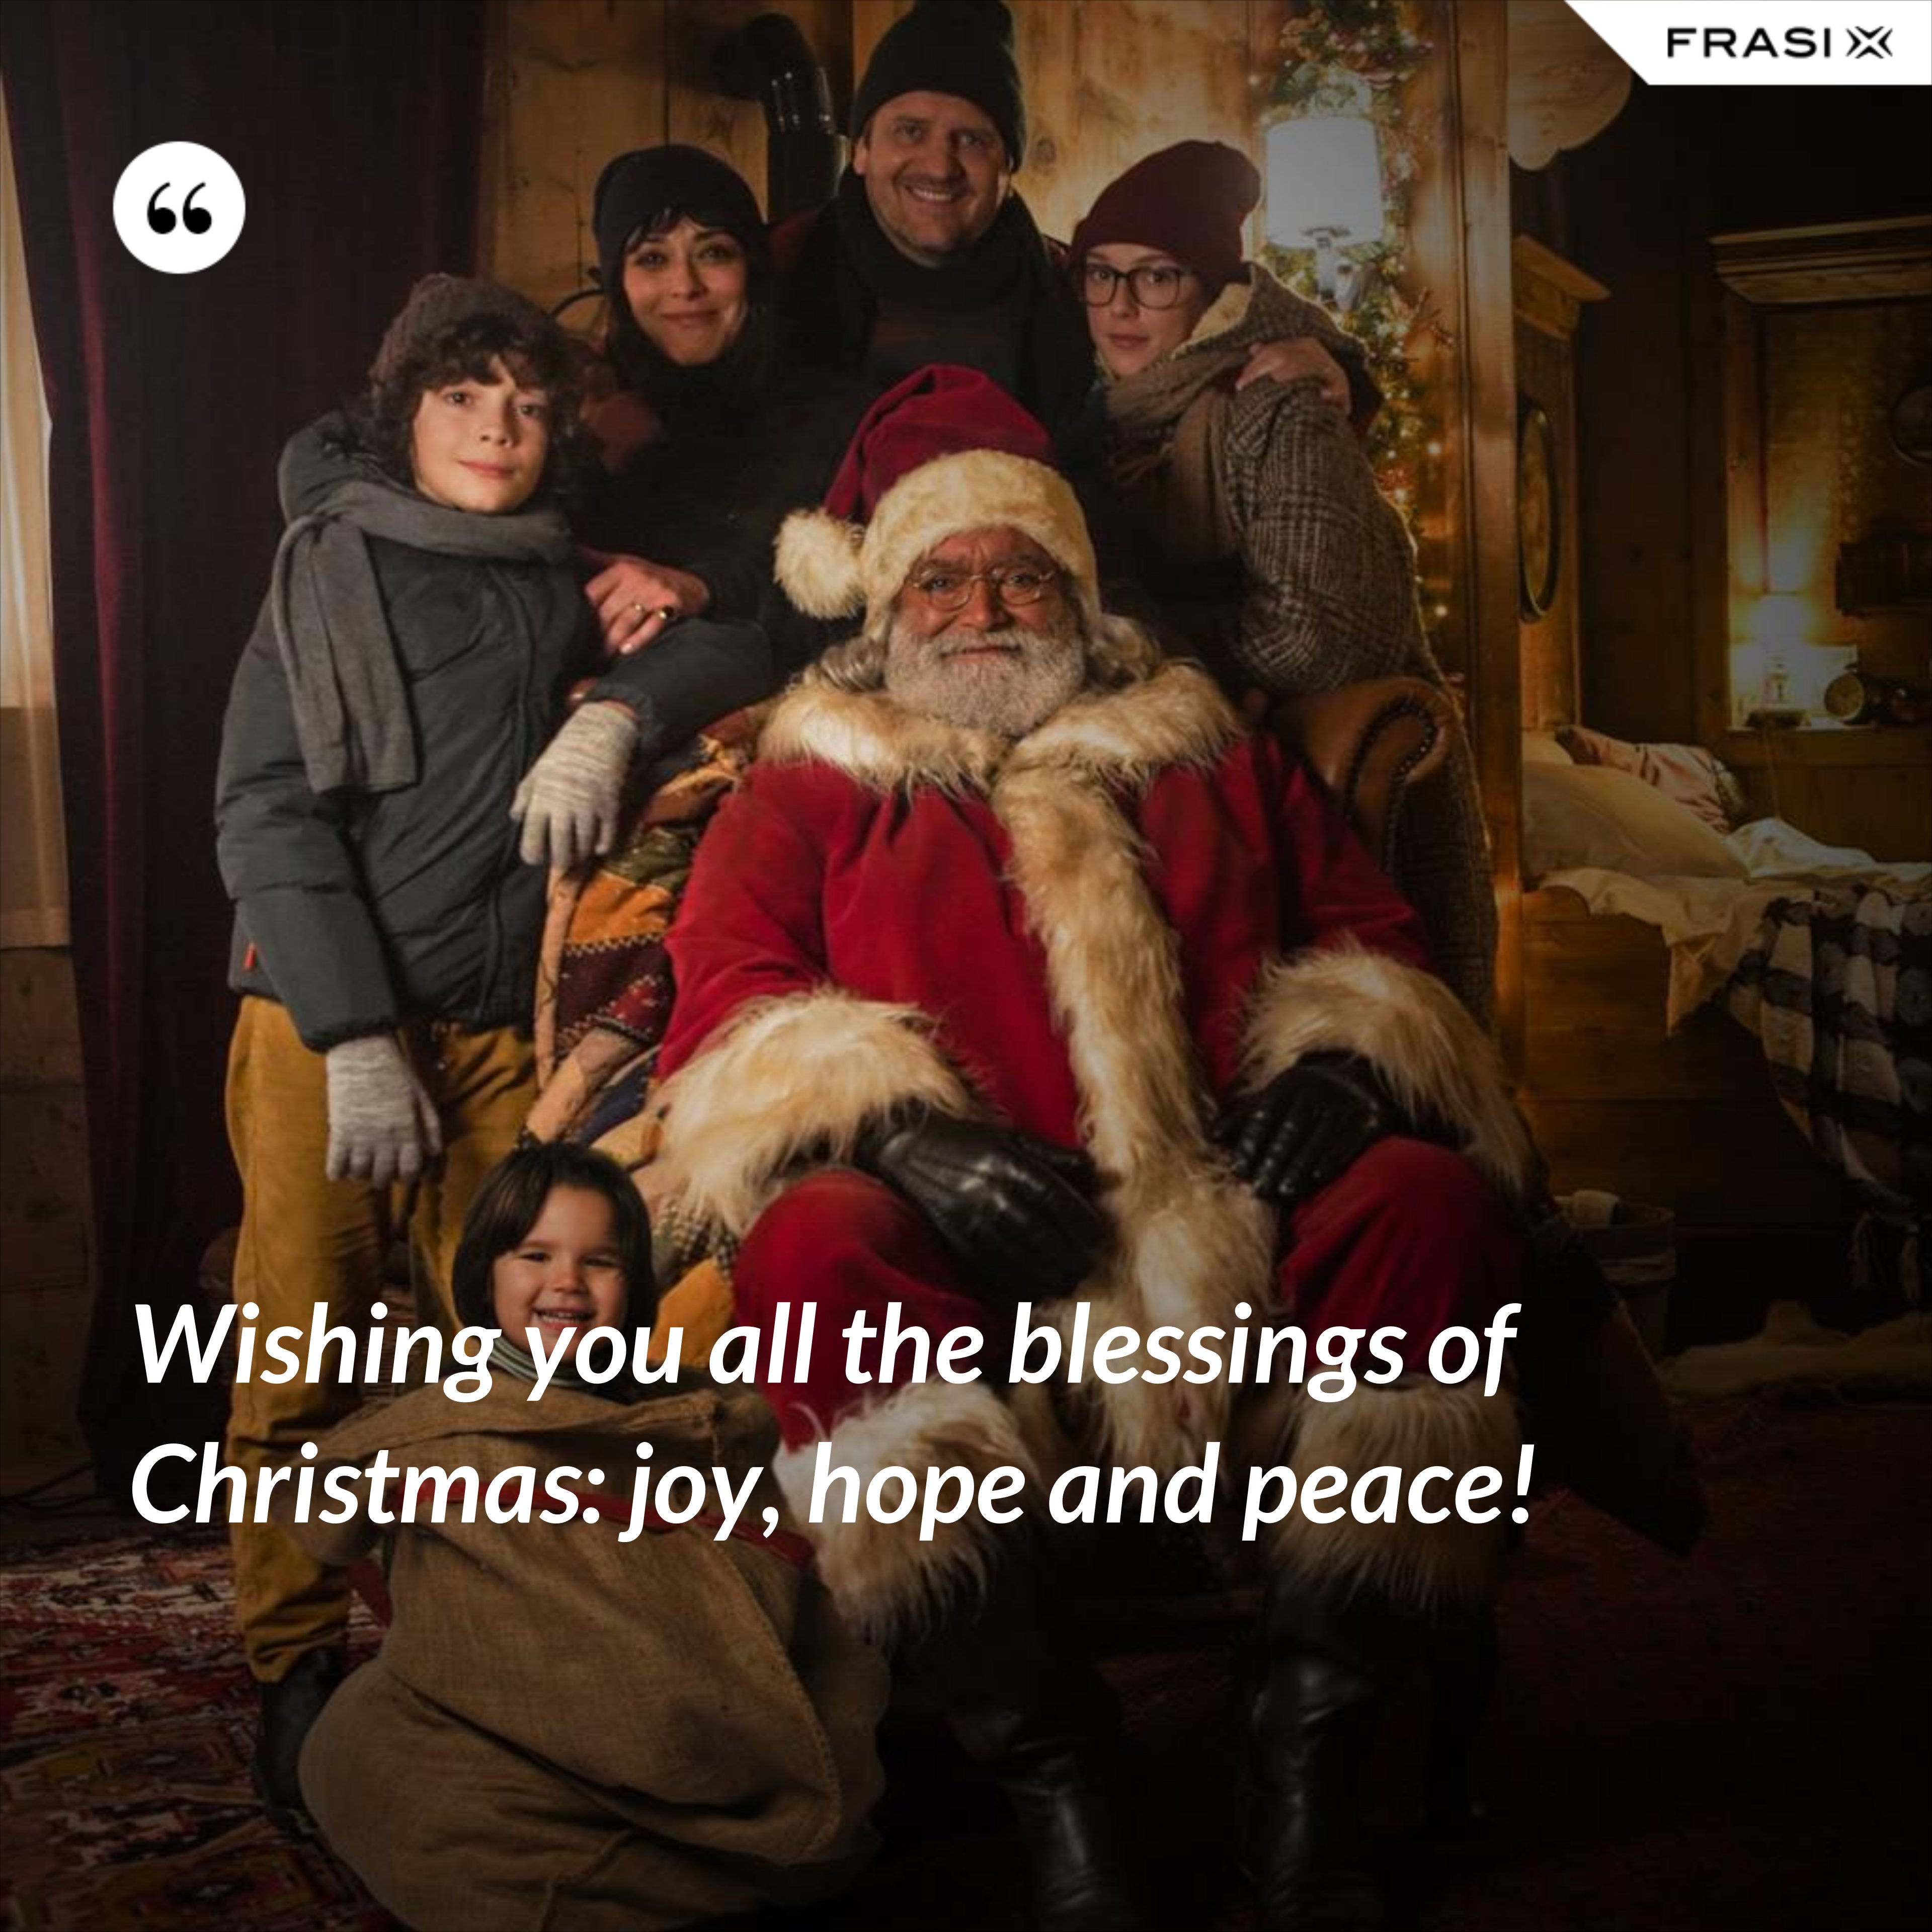 Wishing you all the blessings of Christmas: joy, hope and peace! - Anonimo